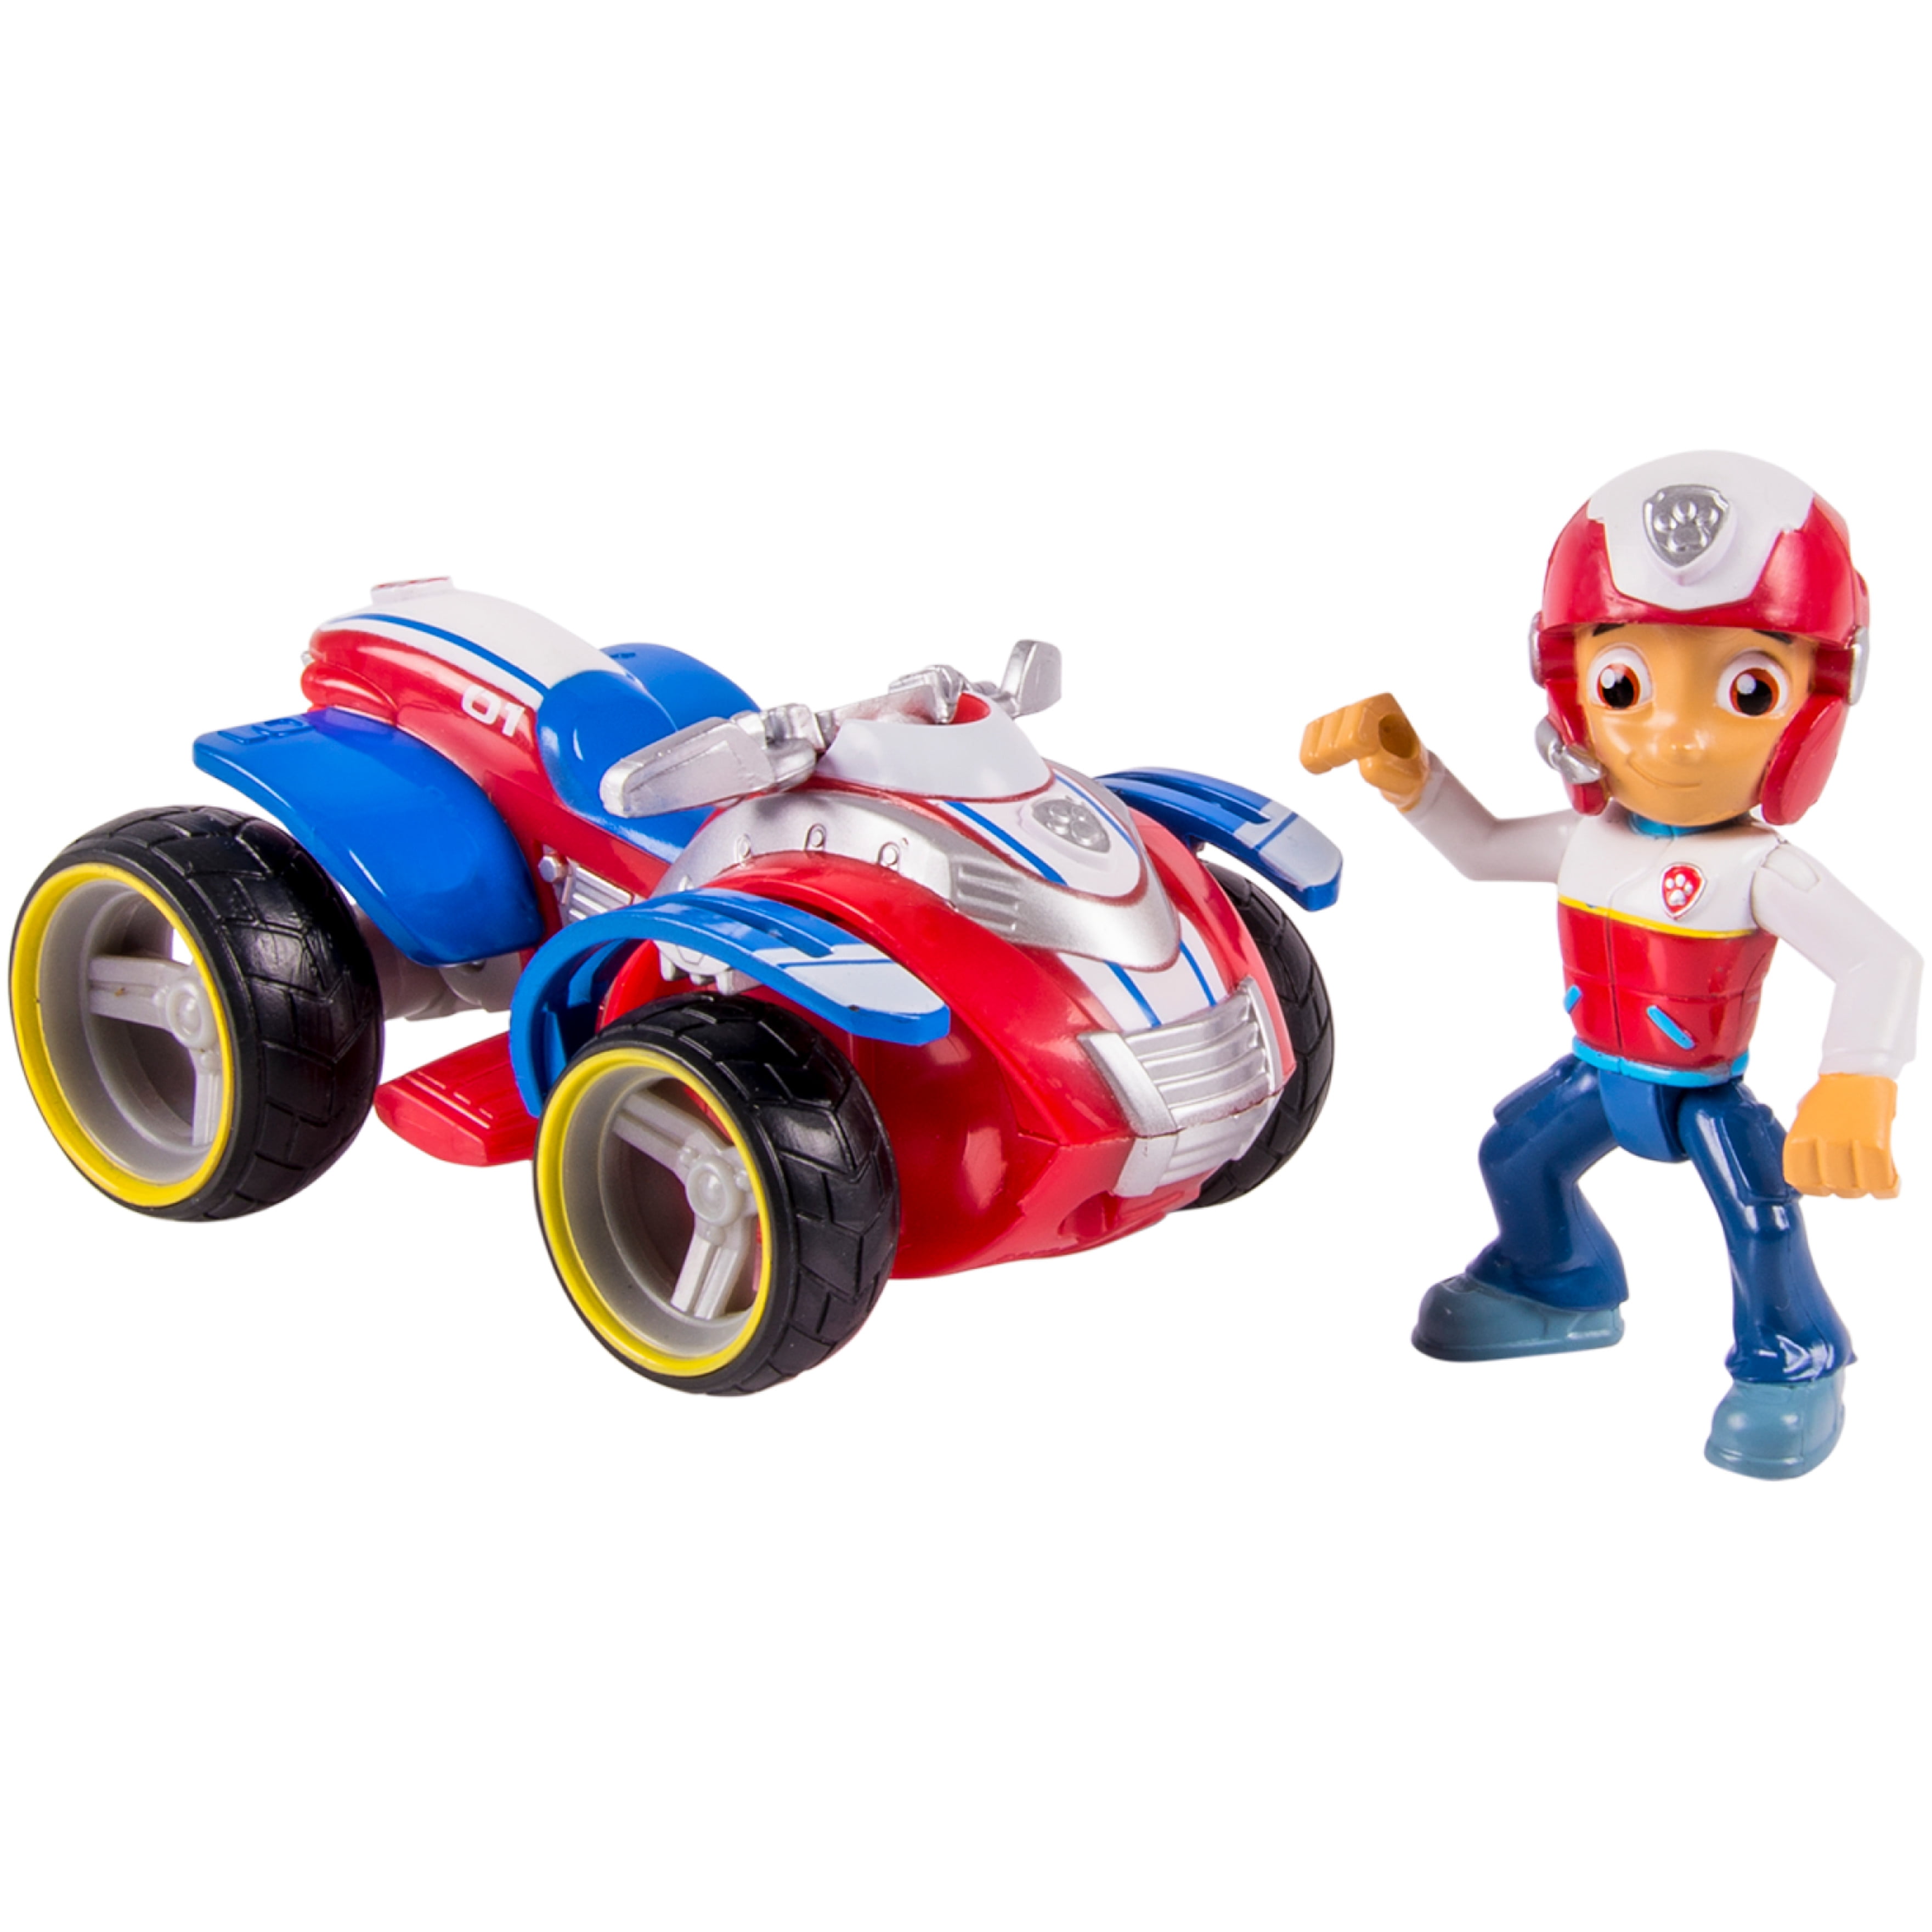 Paw Patrol Ryder's Rescue ATV Vechicle and Figure